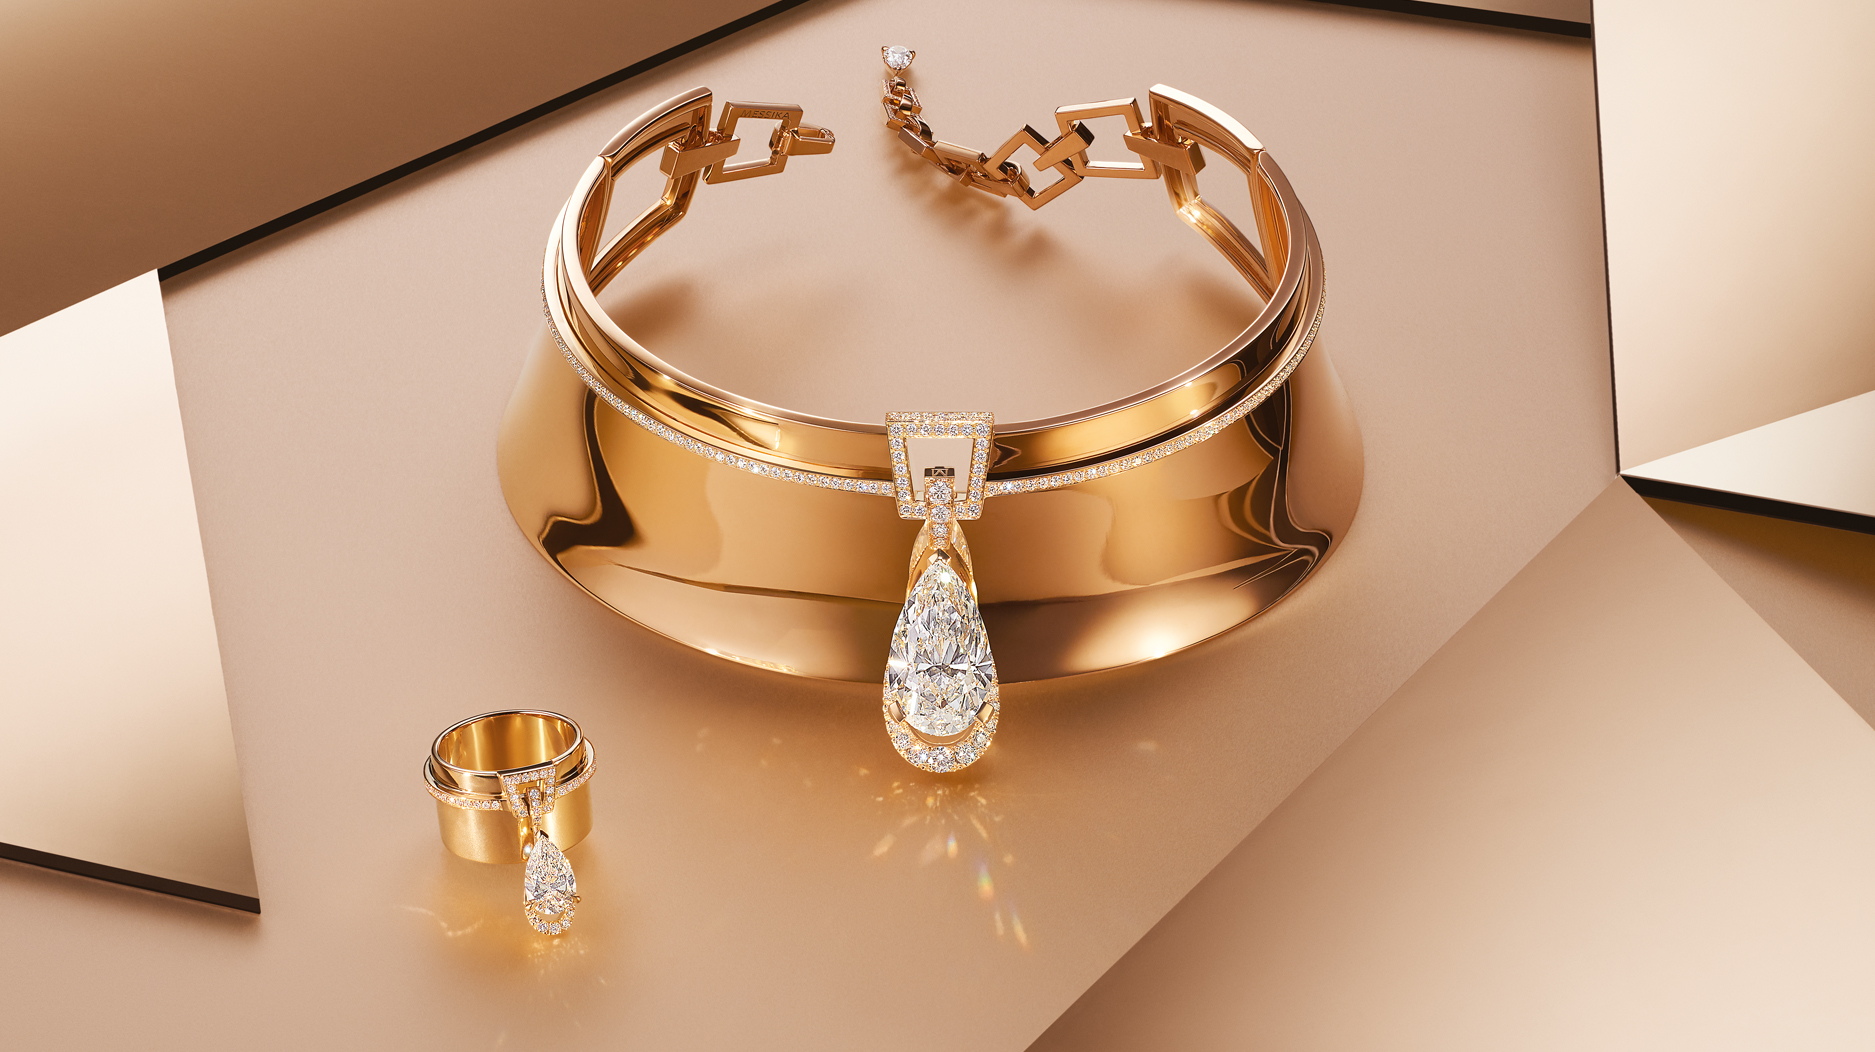 Official Messika Website – Luxury Jewelry and High Jewelry